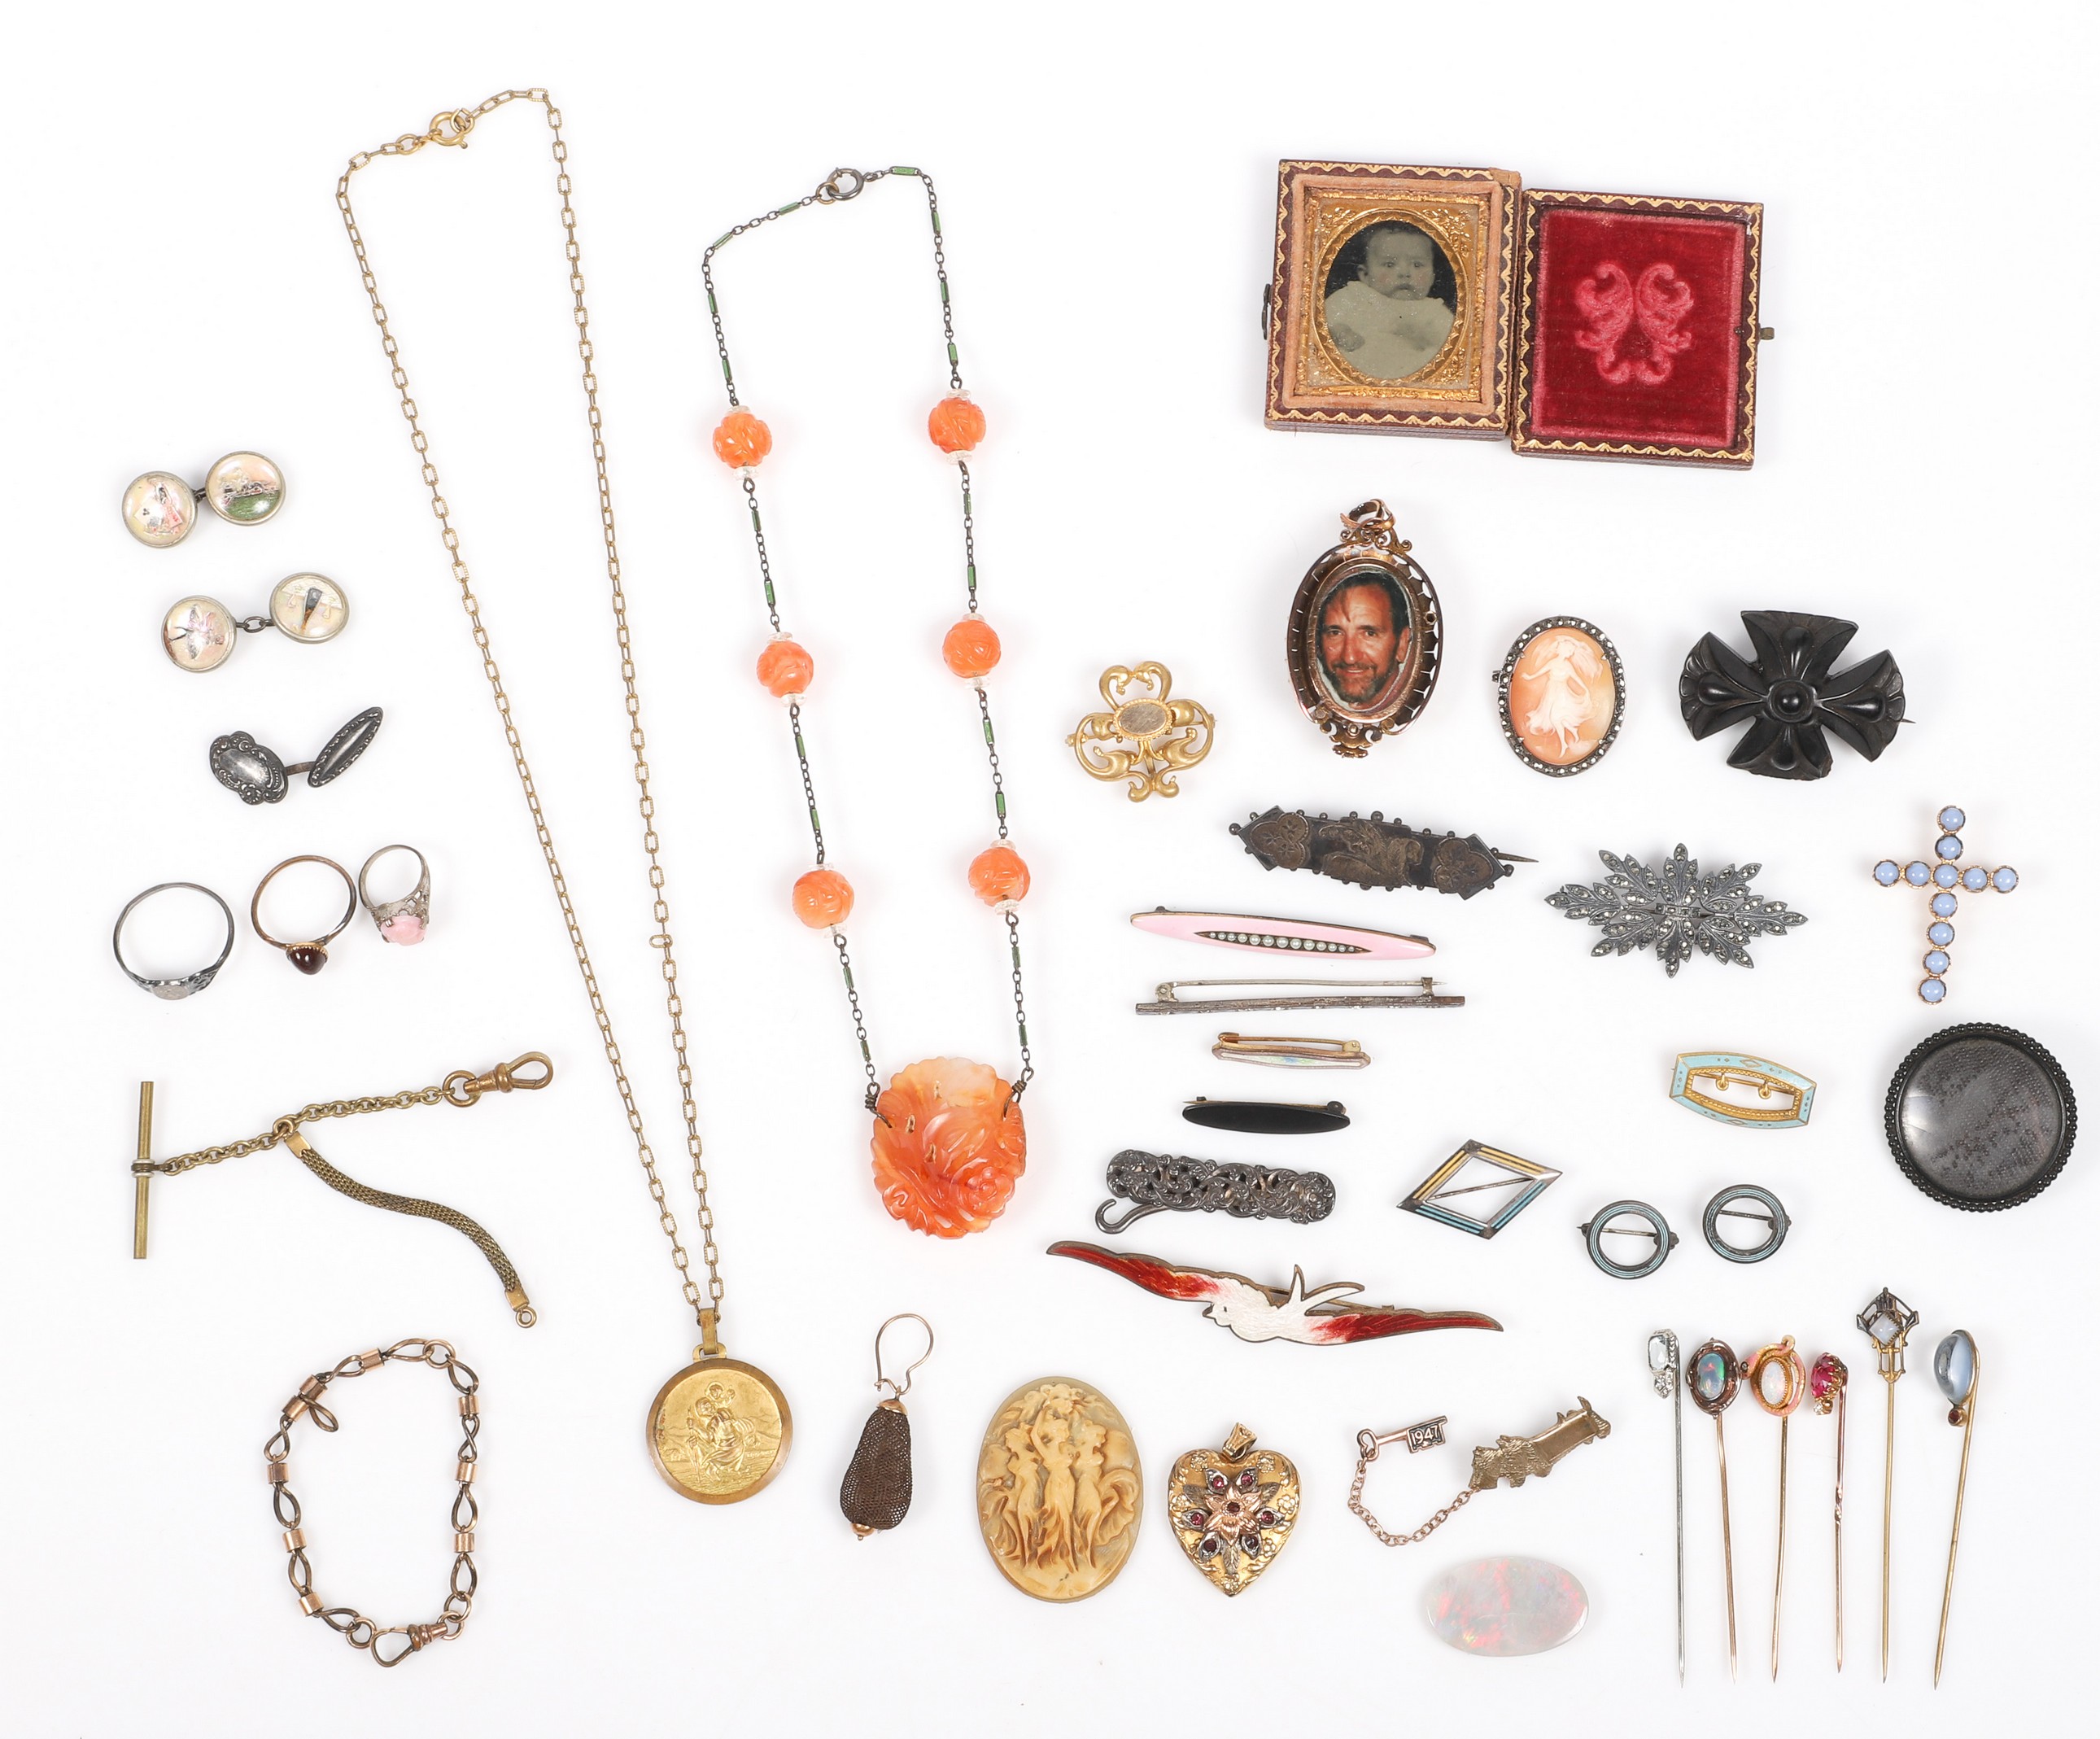 Victorian and style jewelry grouping 2e170d